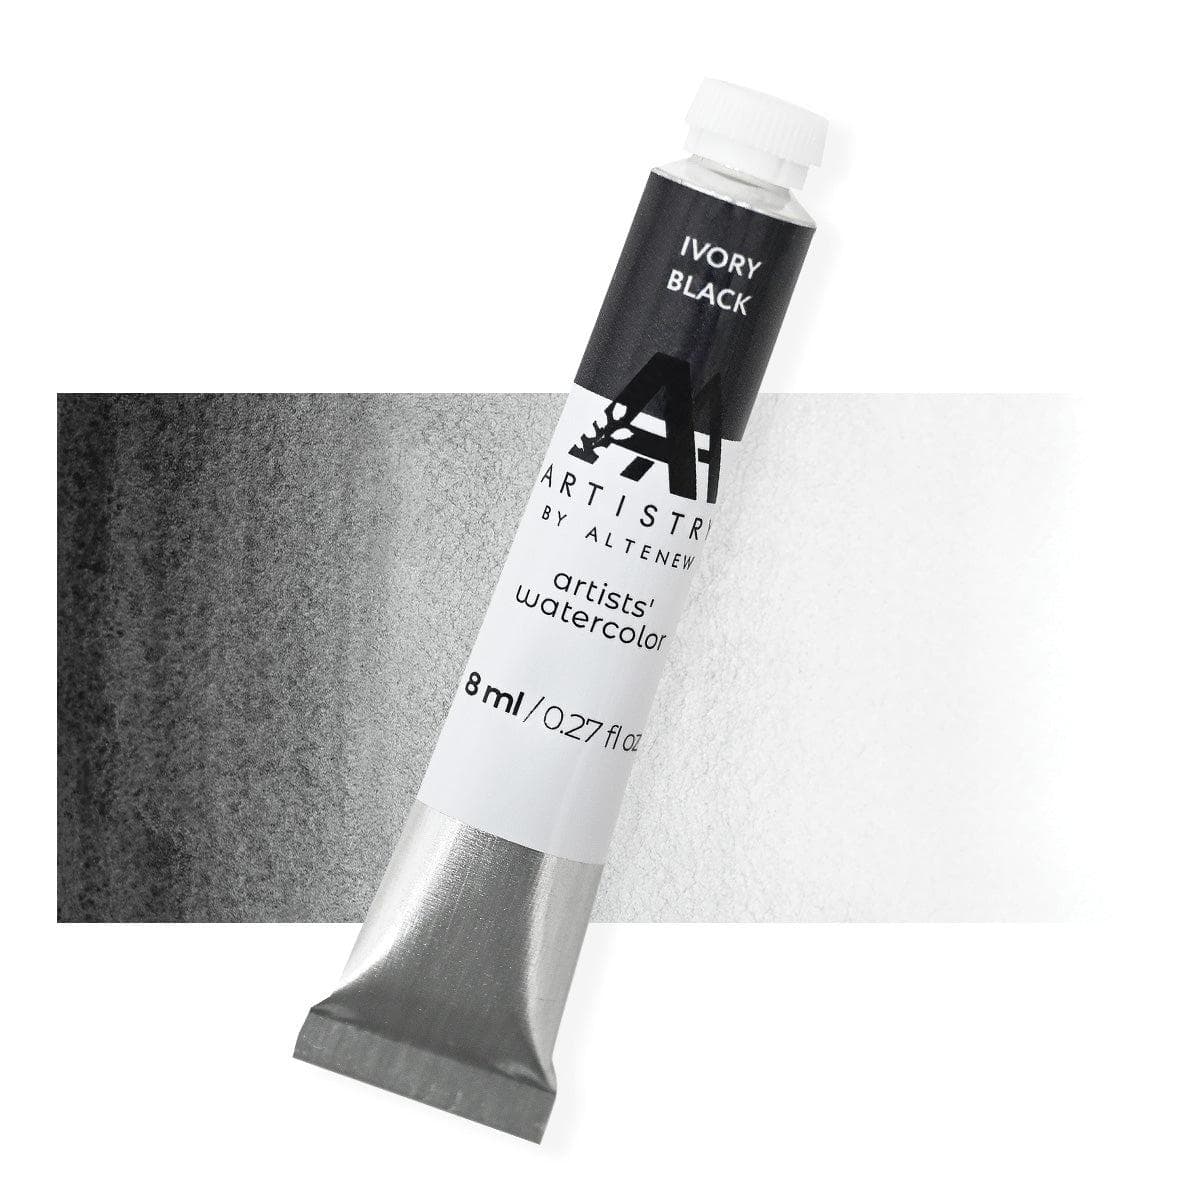 Watercolor Artists' Watercolor Tube - Ivory Black